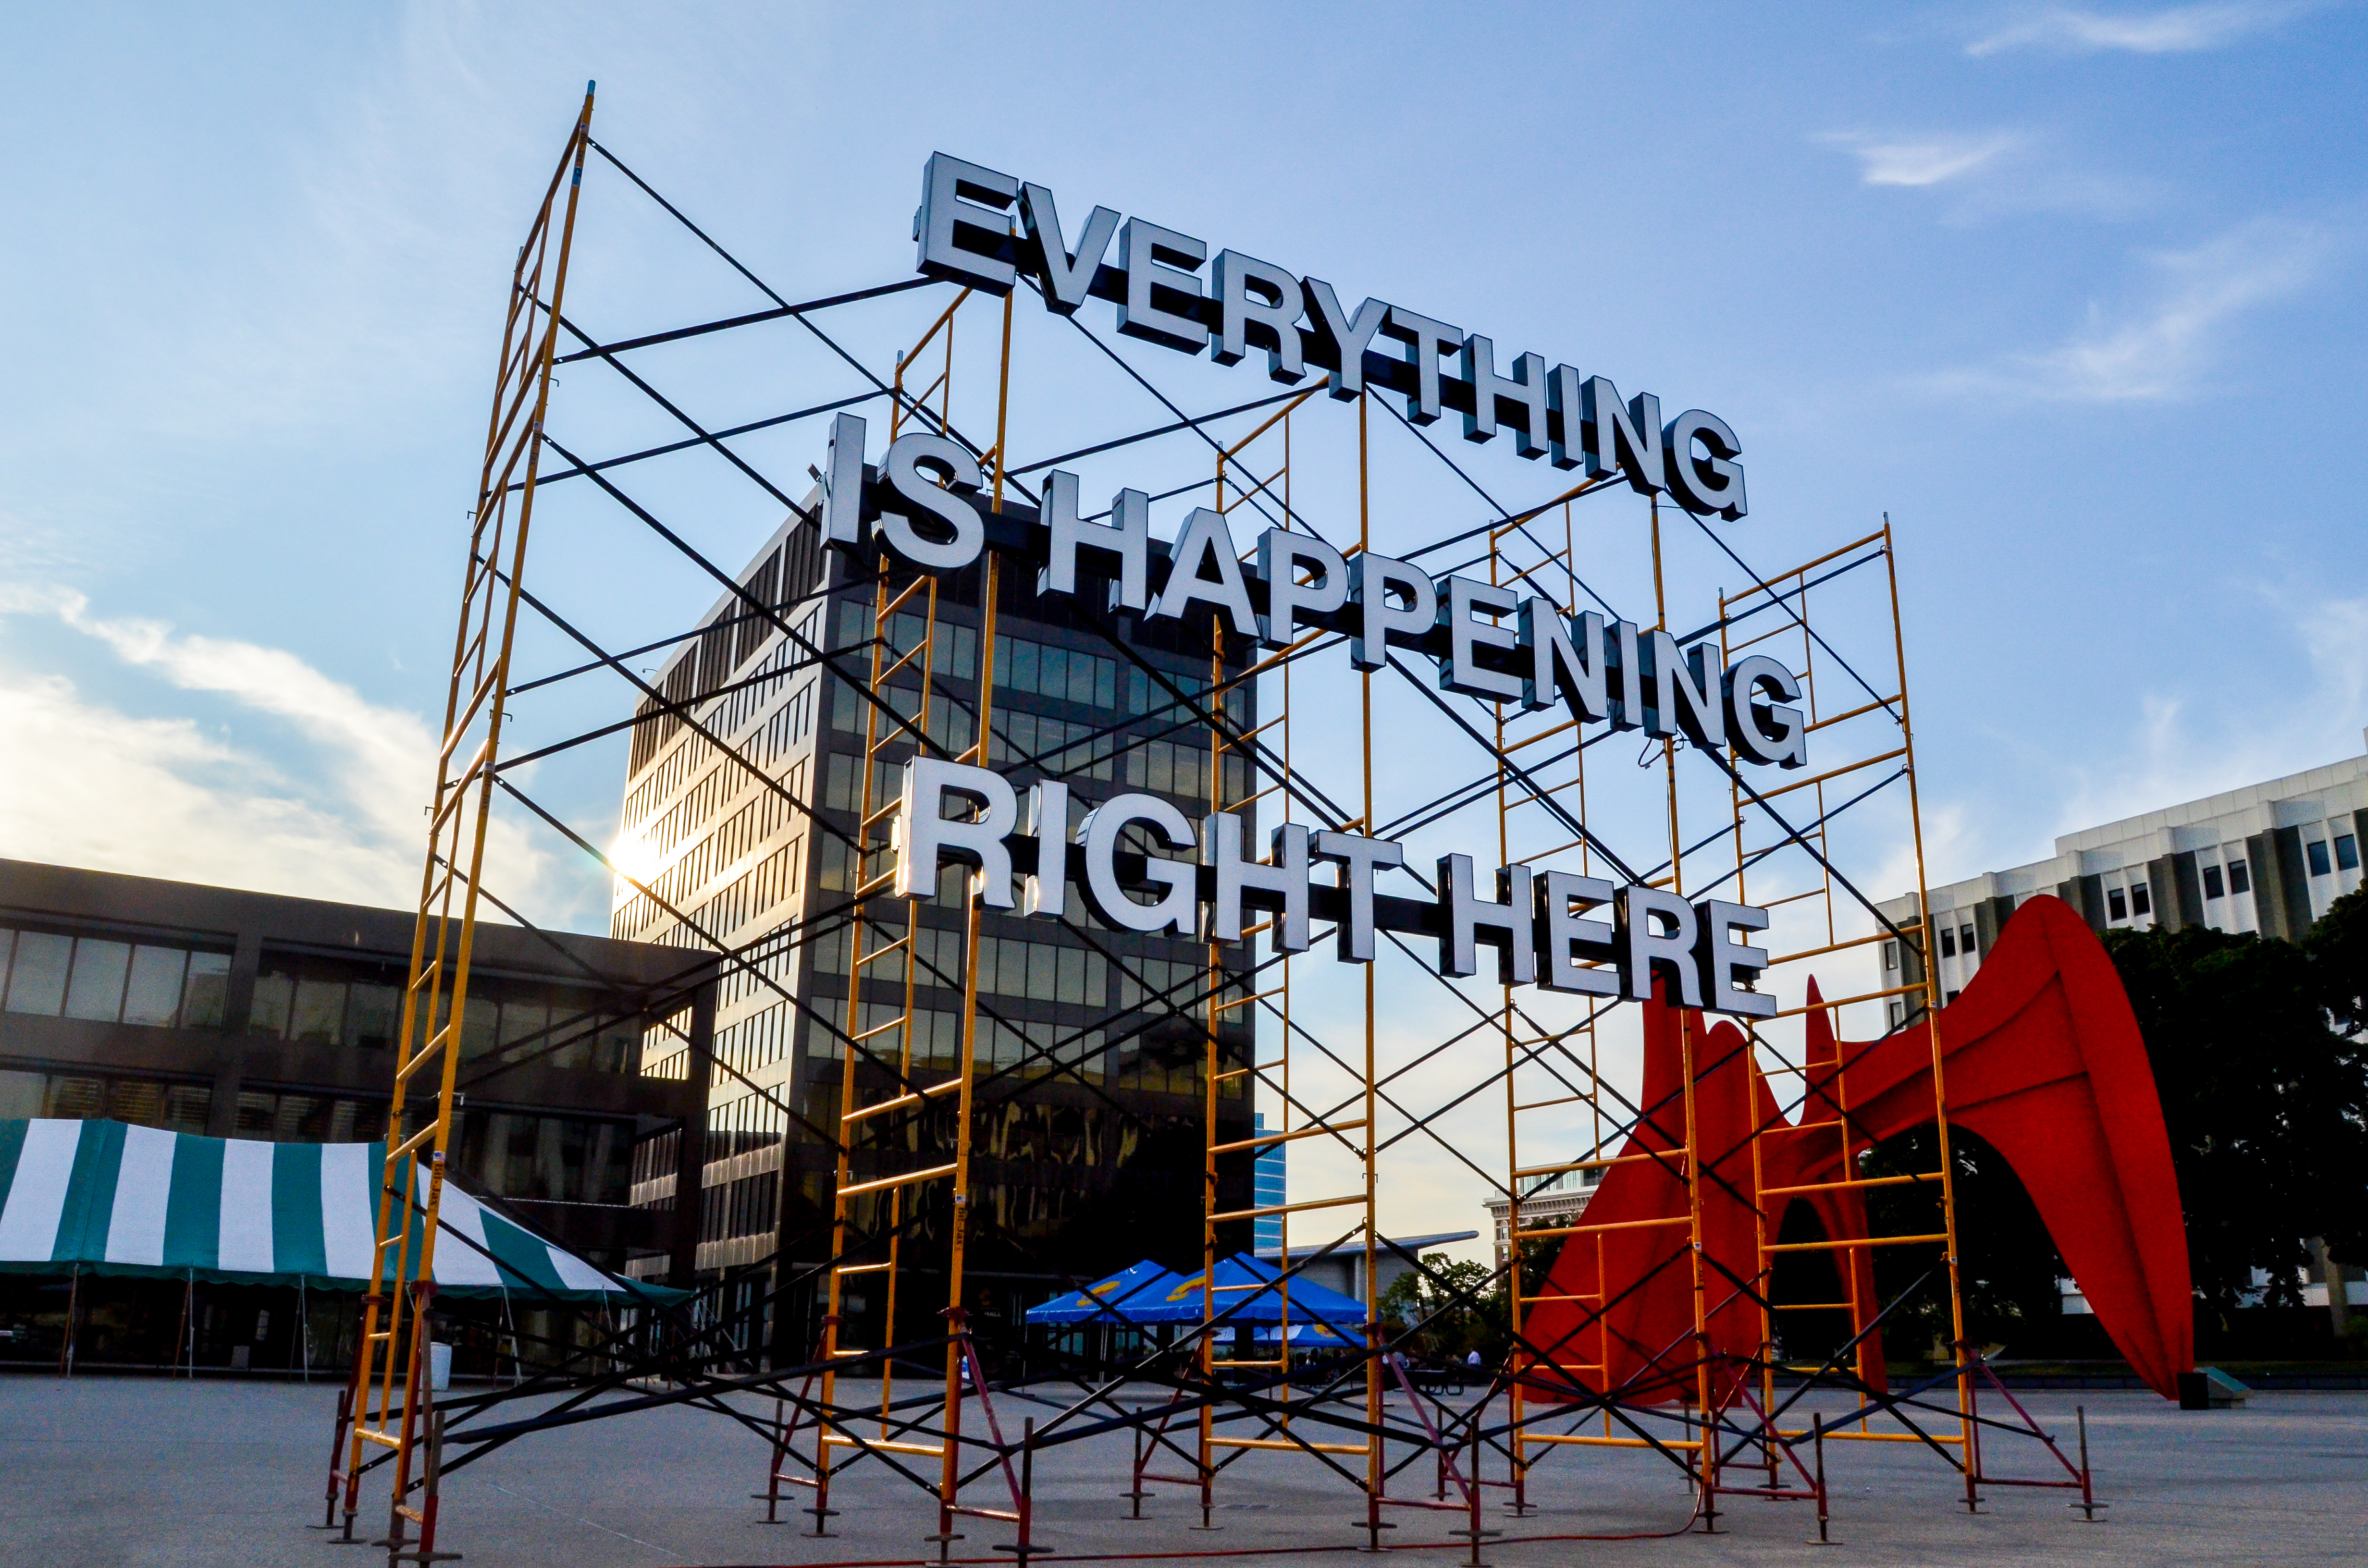 "Everything is Happening Right Here" by Justin Langlois and Hiba Abdallah, at Calder Plaza